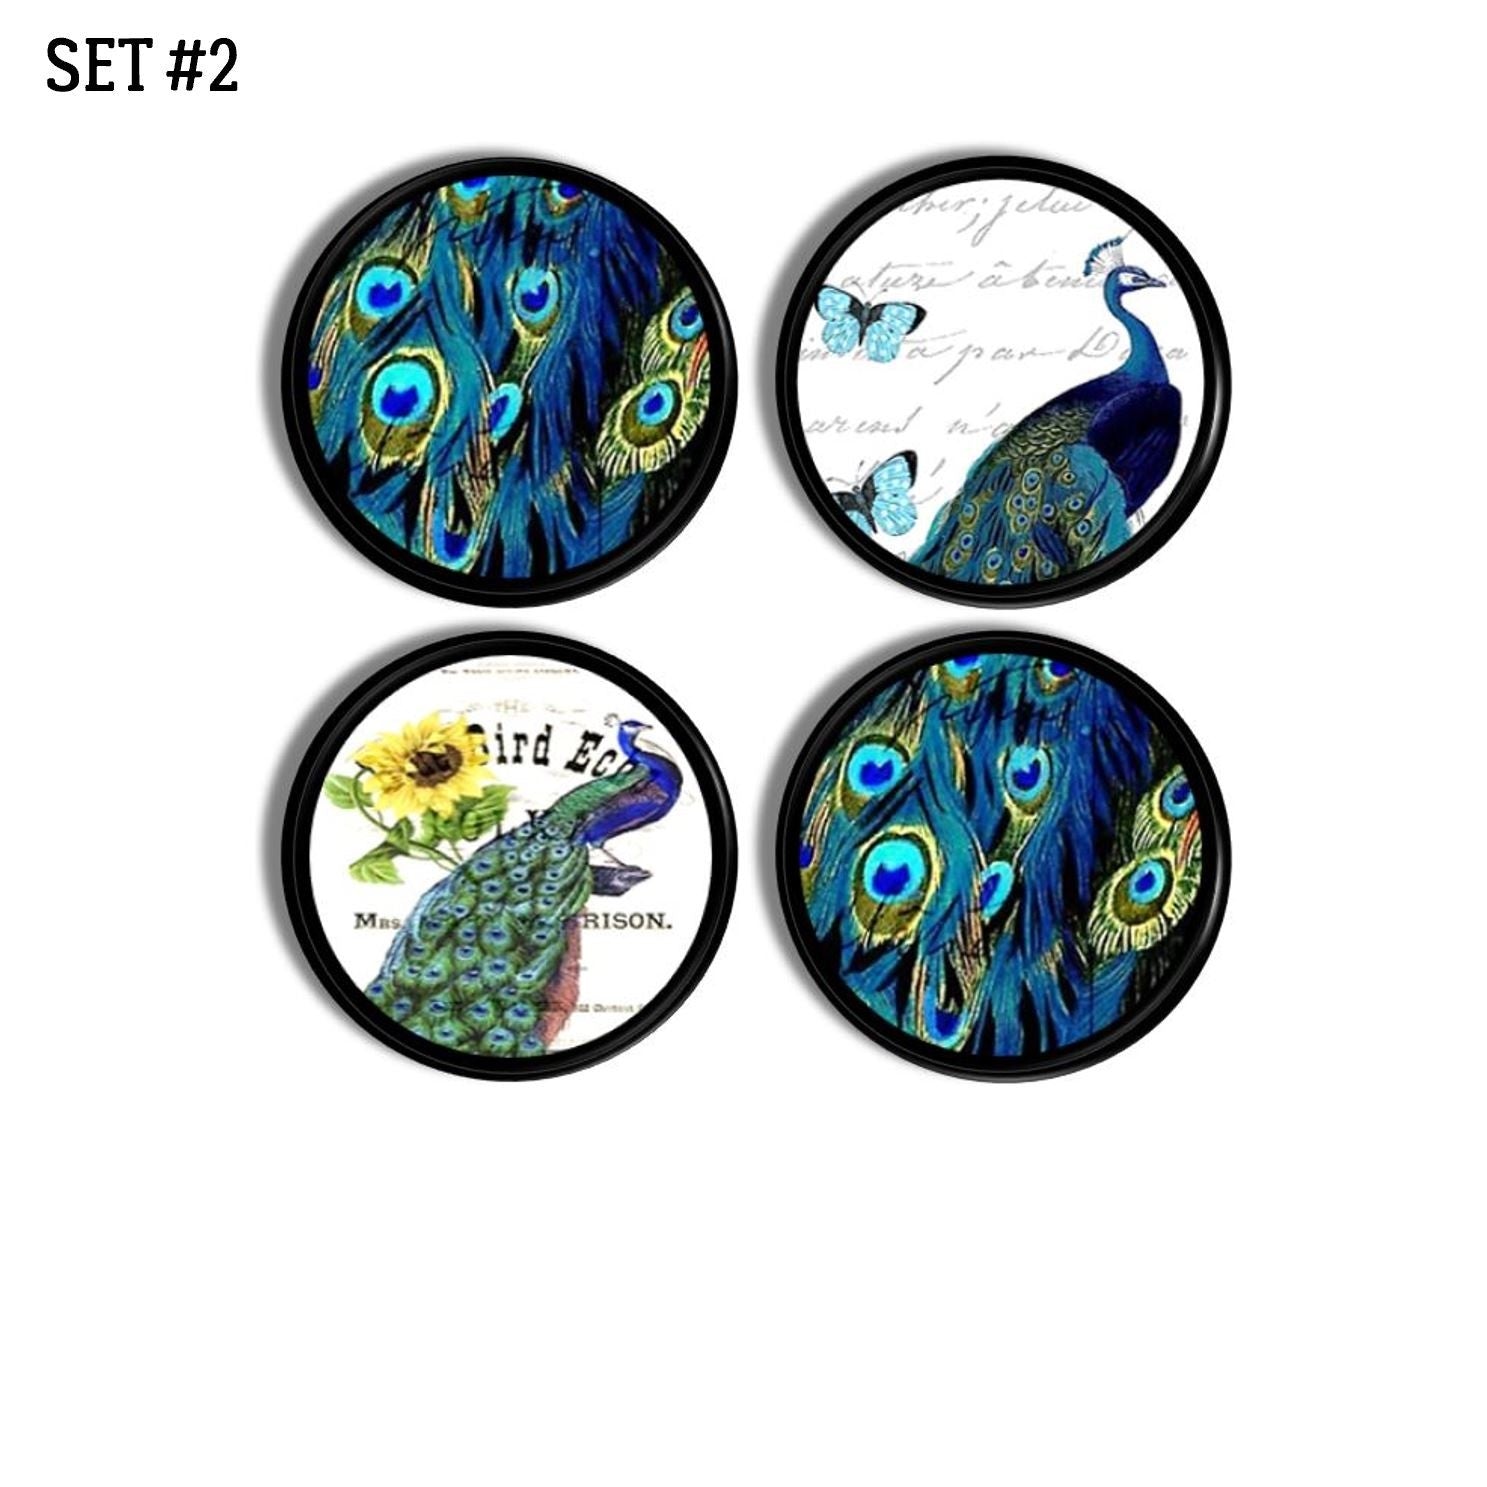 4 Dresser knobs with turquoise blue male peacock bird on postcard background. Unique feather theme door hardware.